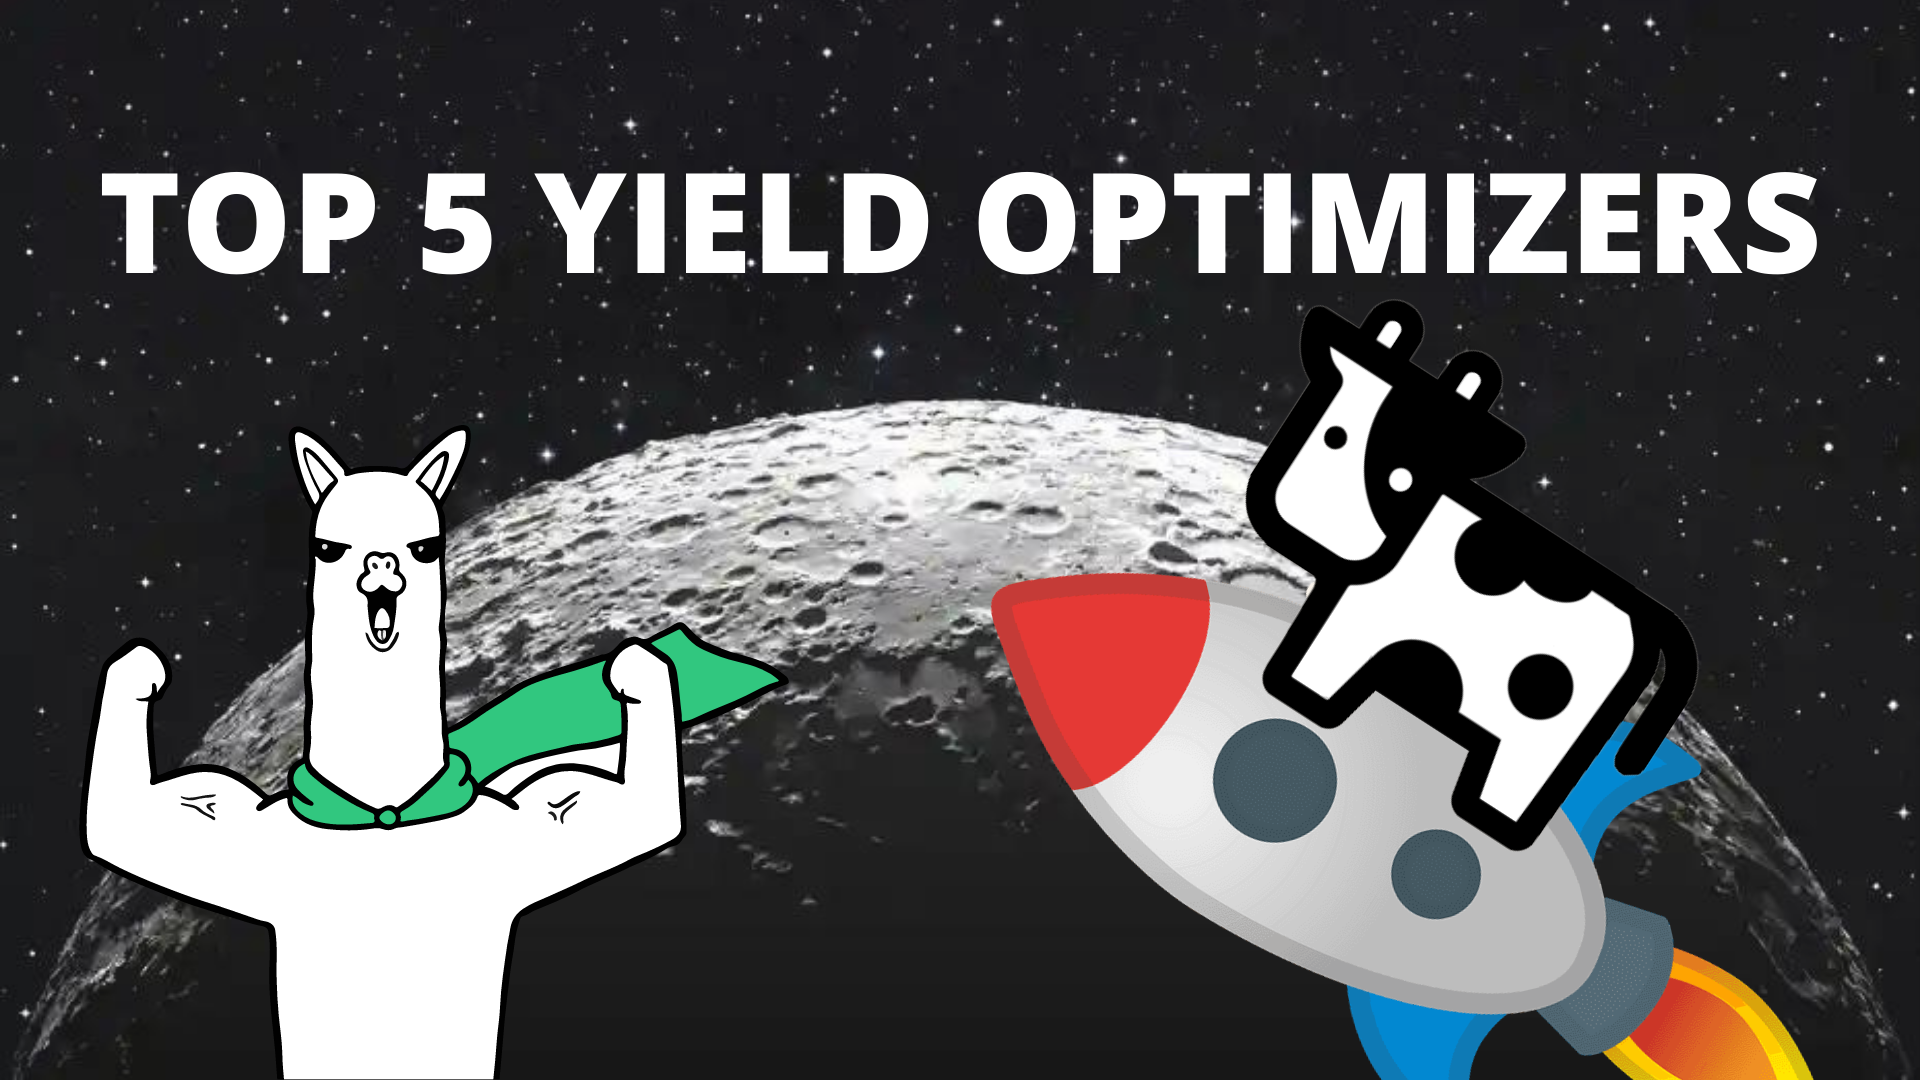 Get Maximum Gains From Your Crypto: A Look At The Top 5 Yield Optimizers In The DeFi World